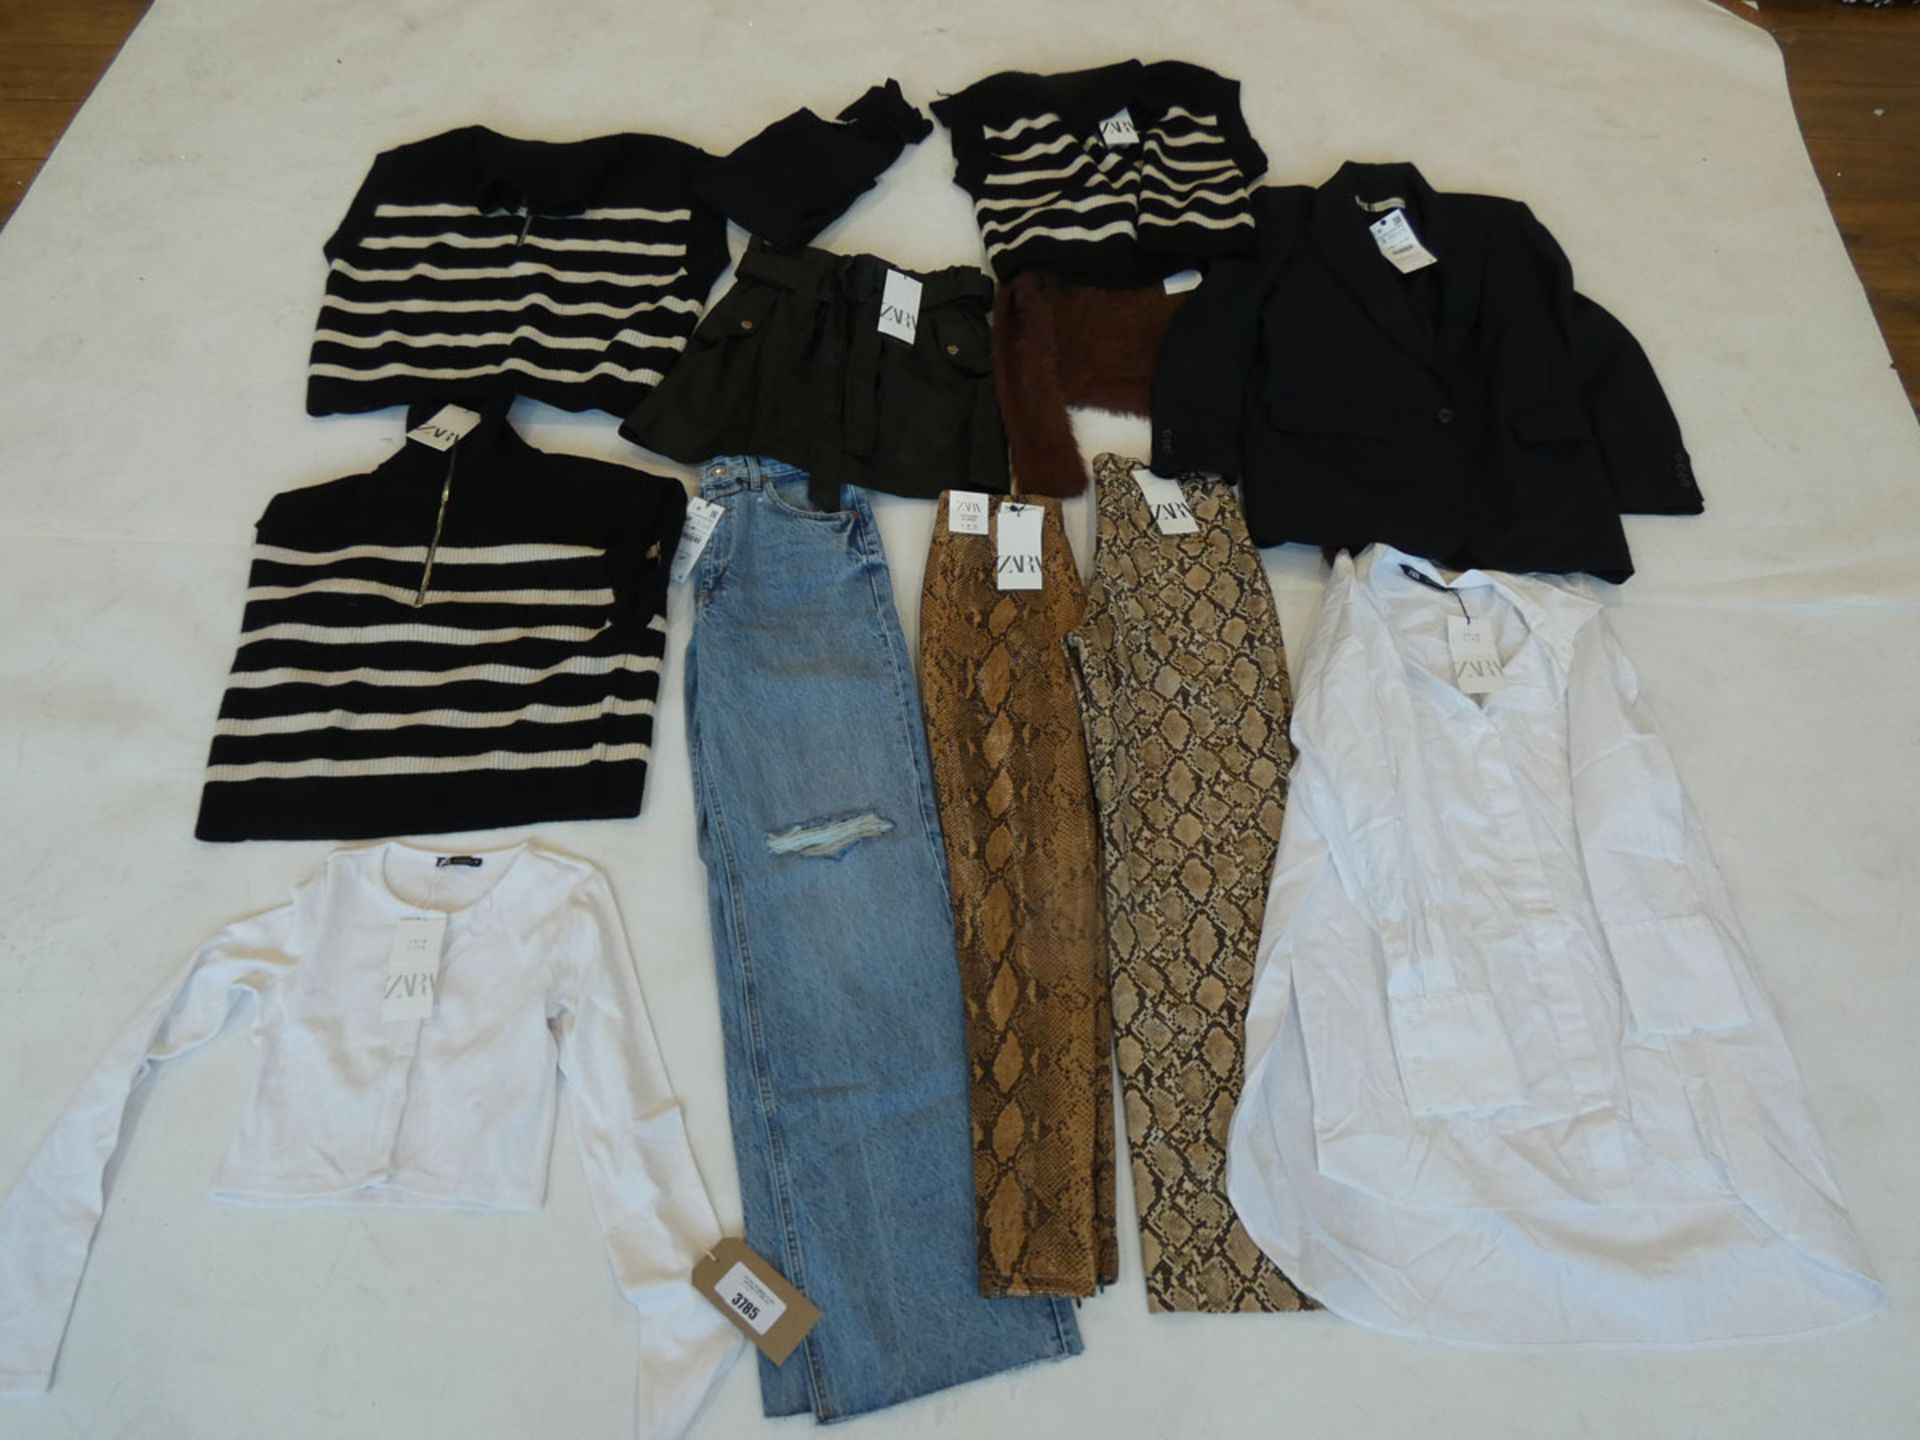 Selection of Zara clothing to include trousers, jumpers, etc in various sizes